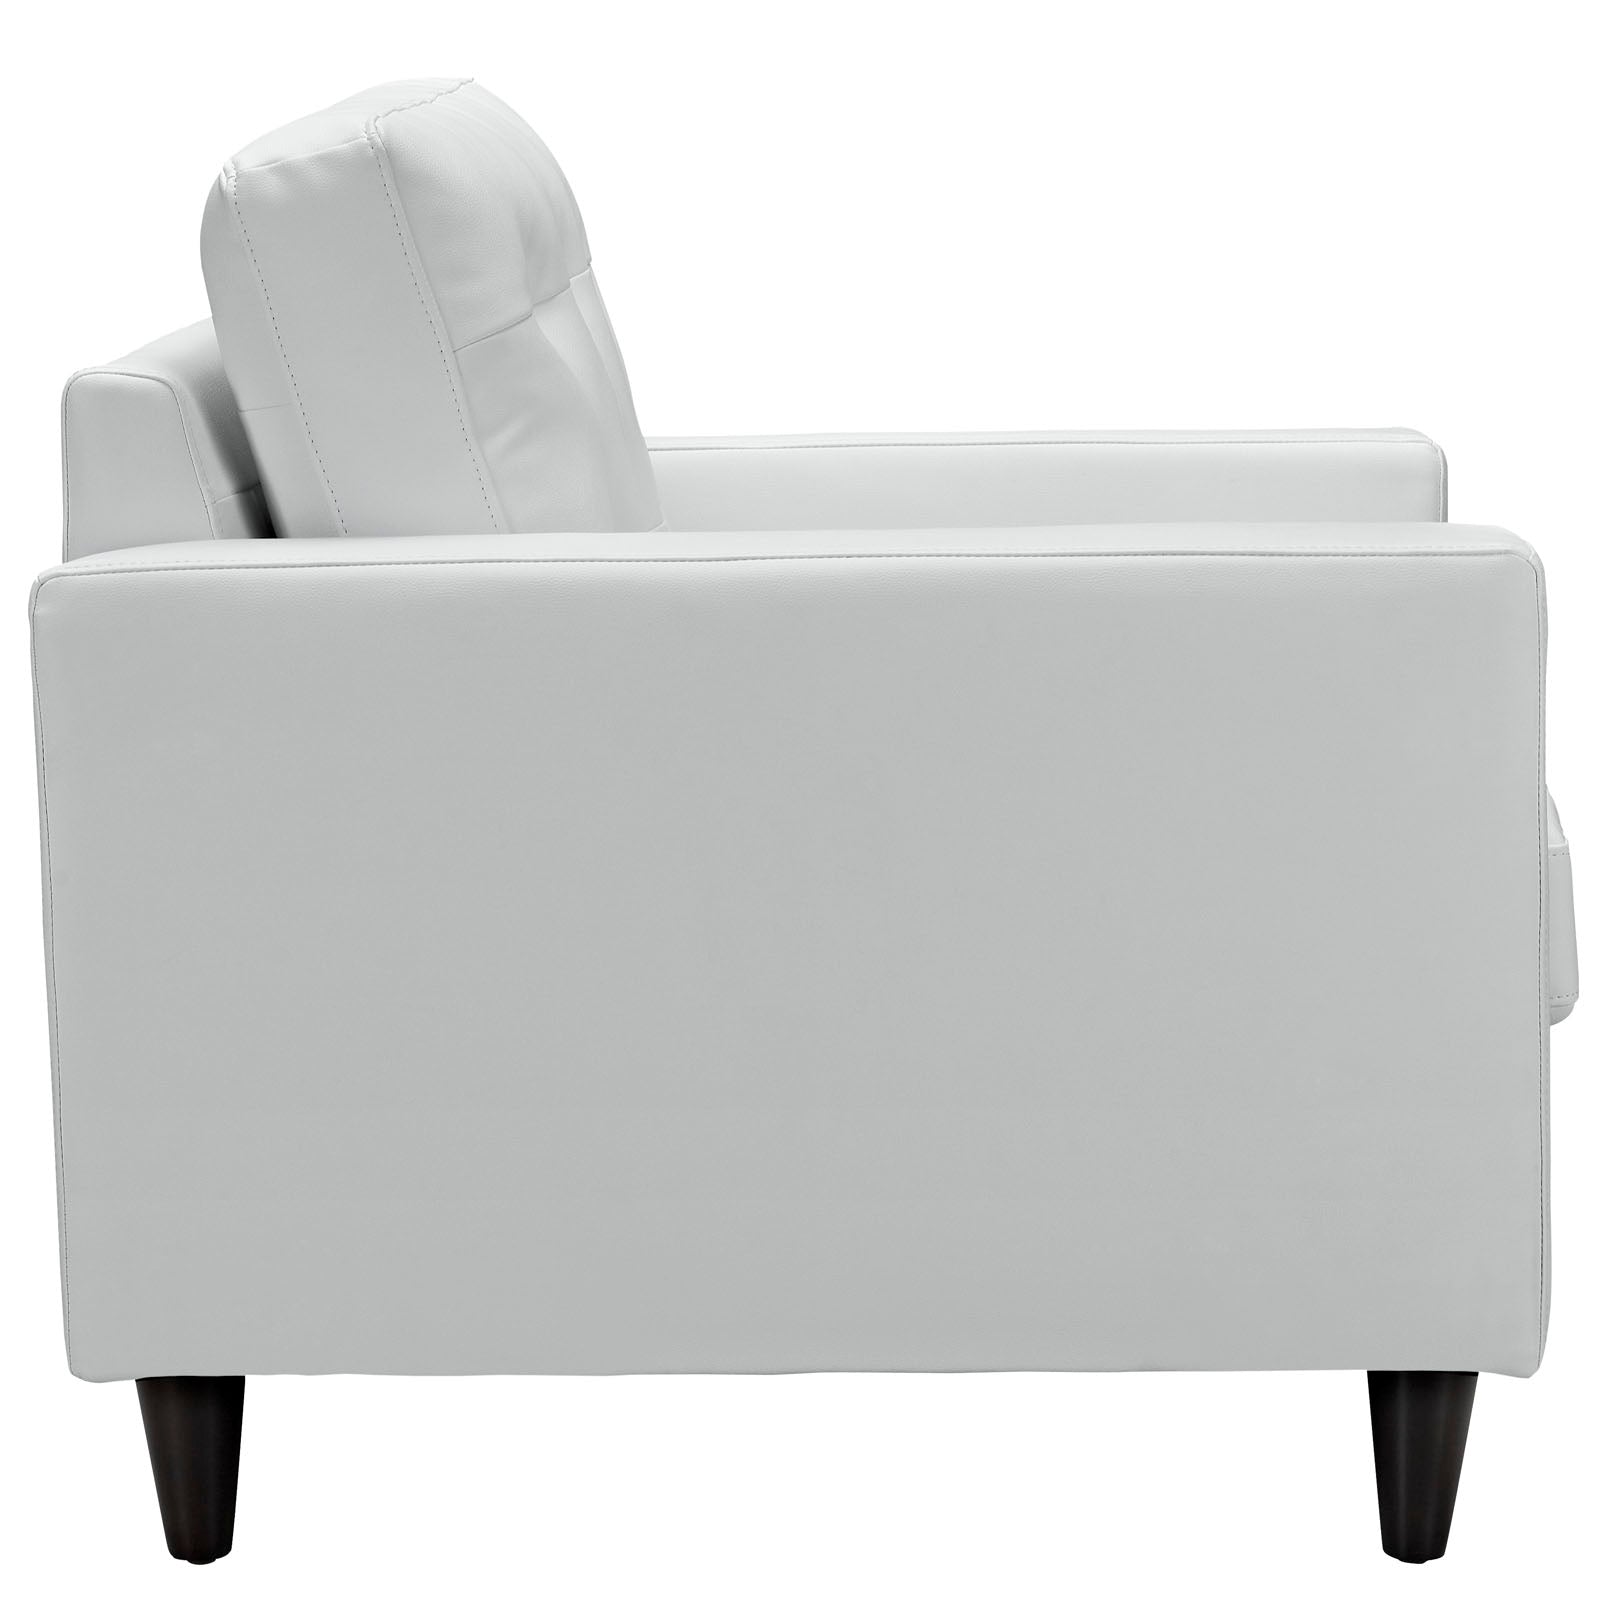 Modway Living Room Sets - Empress Sofa and Armchair Set of 2 White